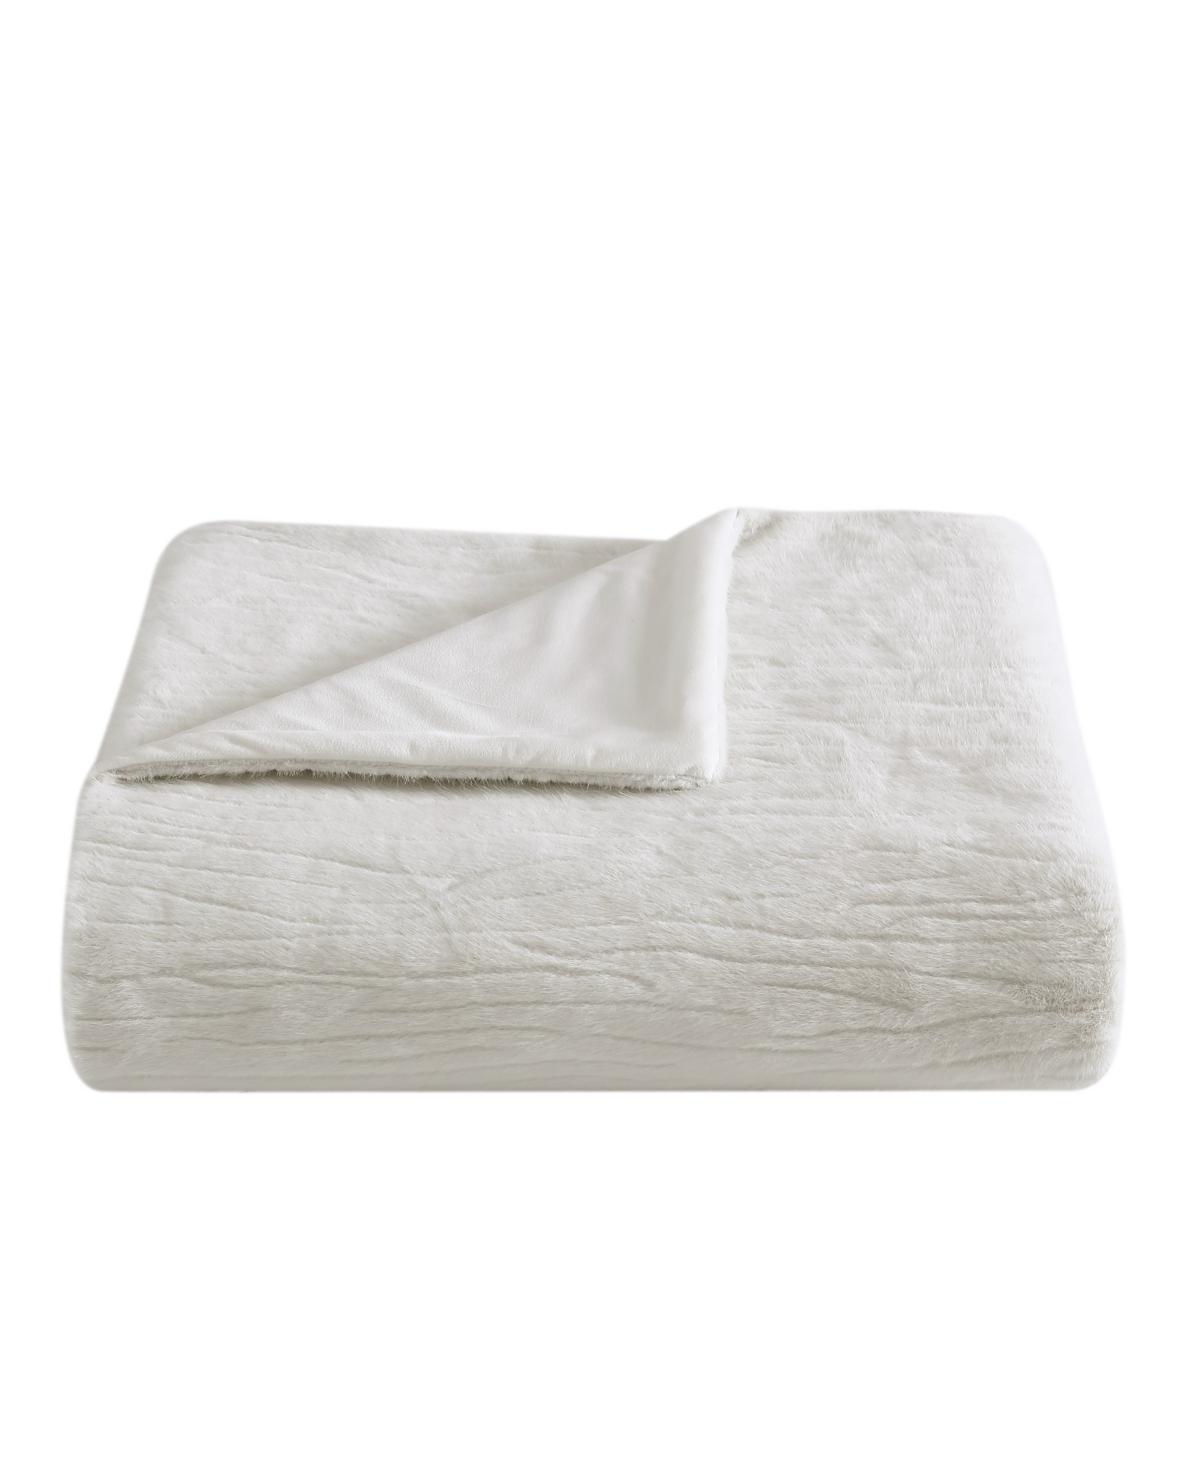 Vera Wang Sculpted Lines Faux Fur Throw Blanket, 60" X 50" Bedding In Ivory